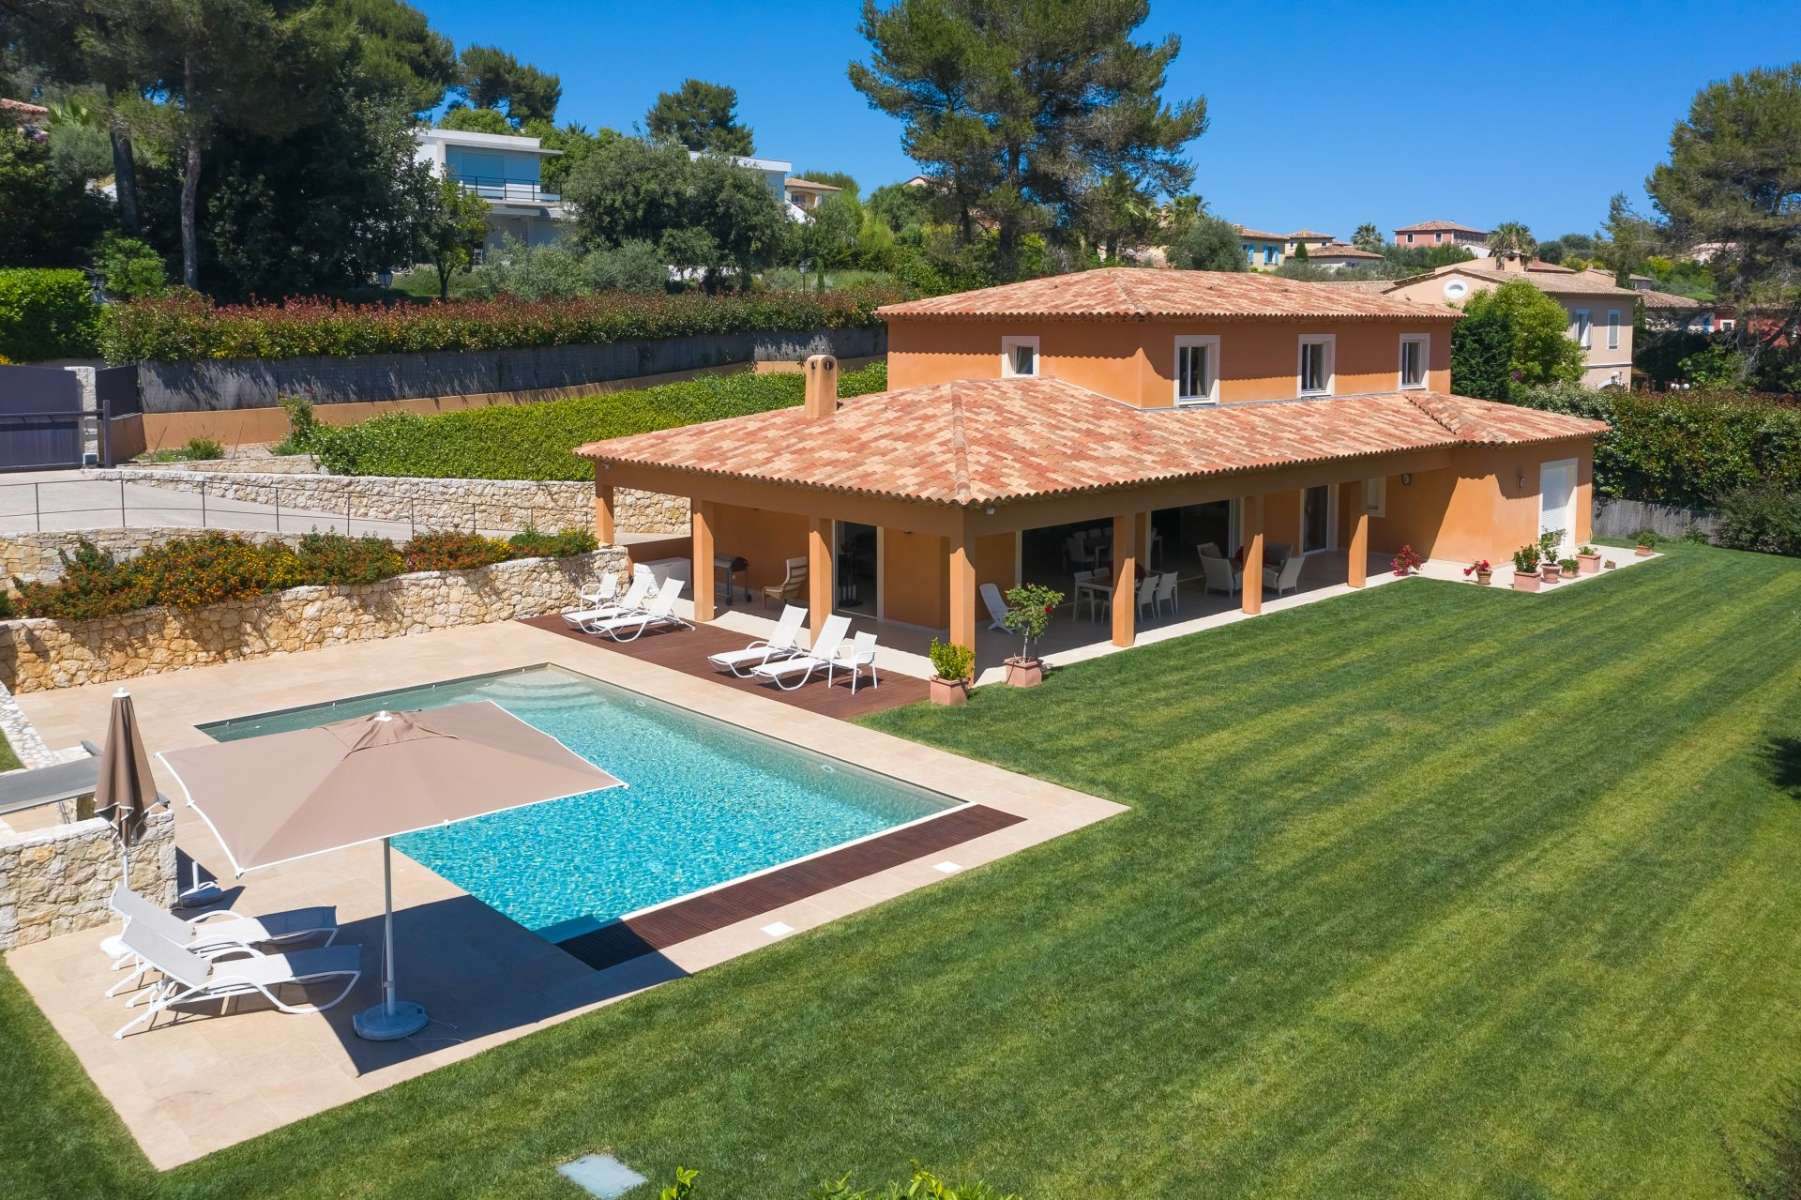 Family home in secure domain in a quiet area of Biot